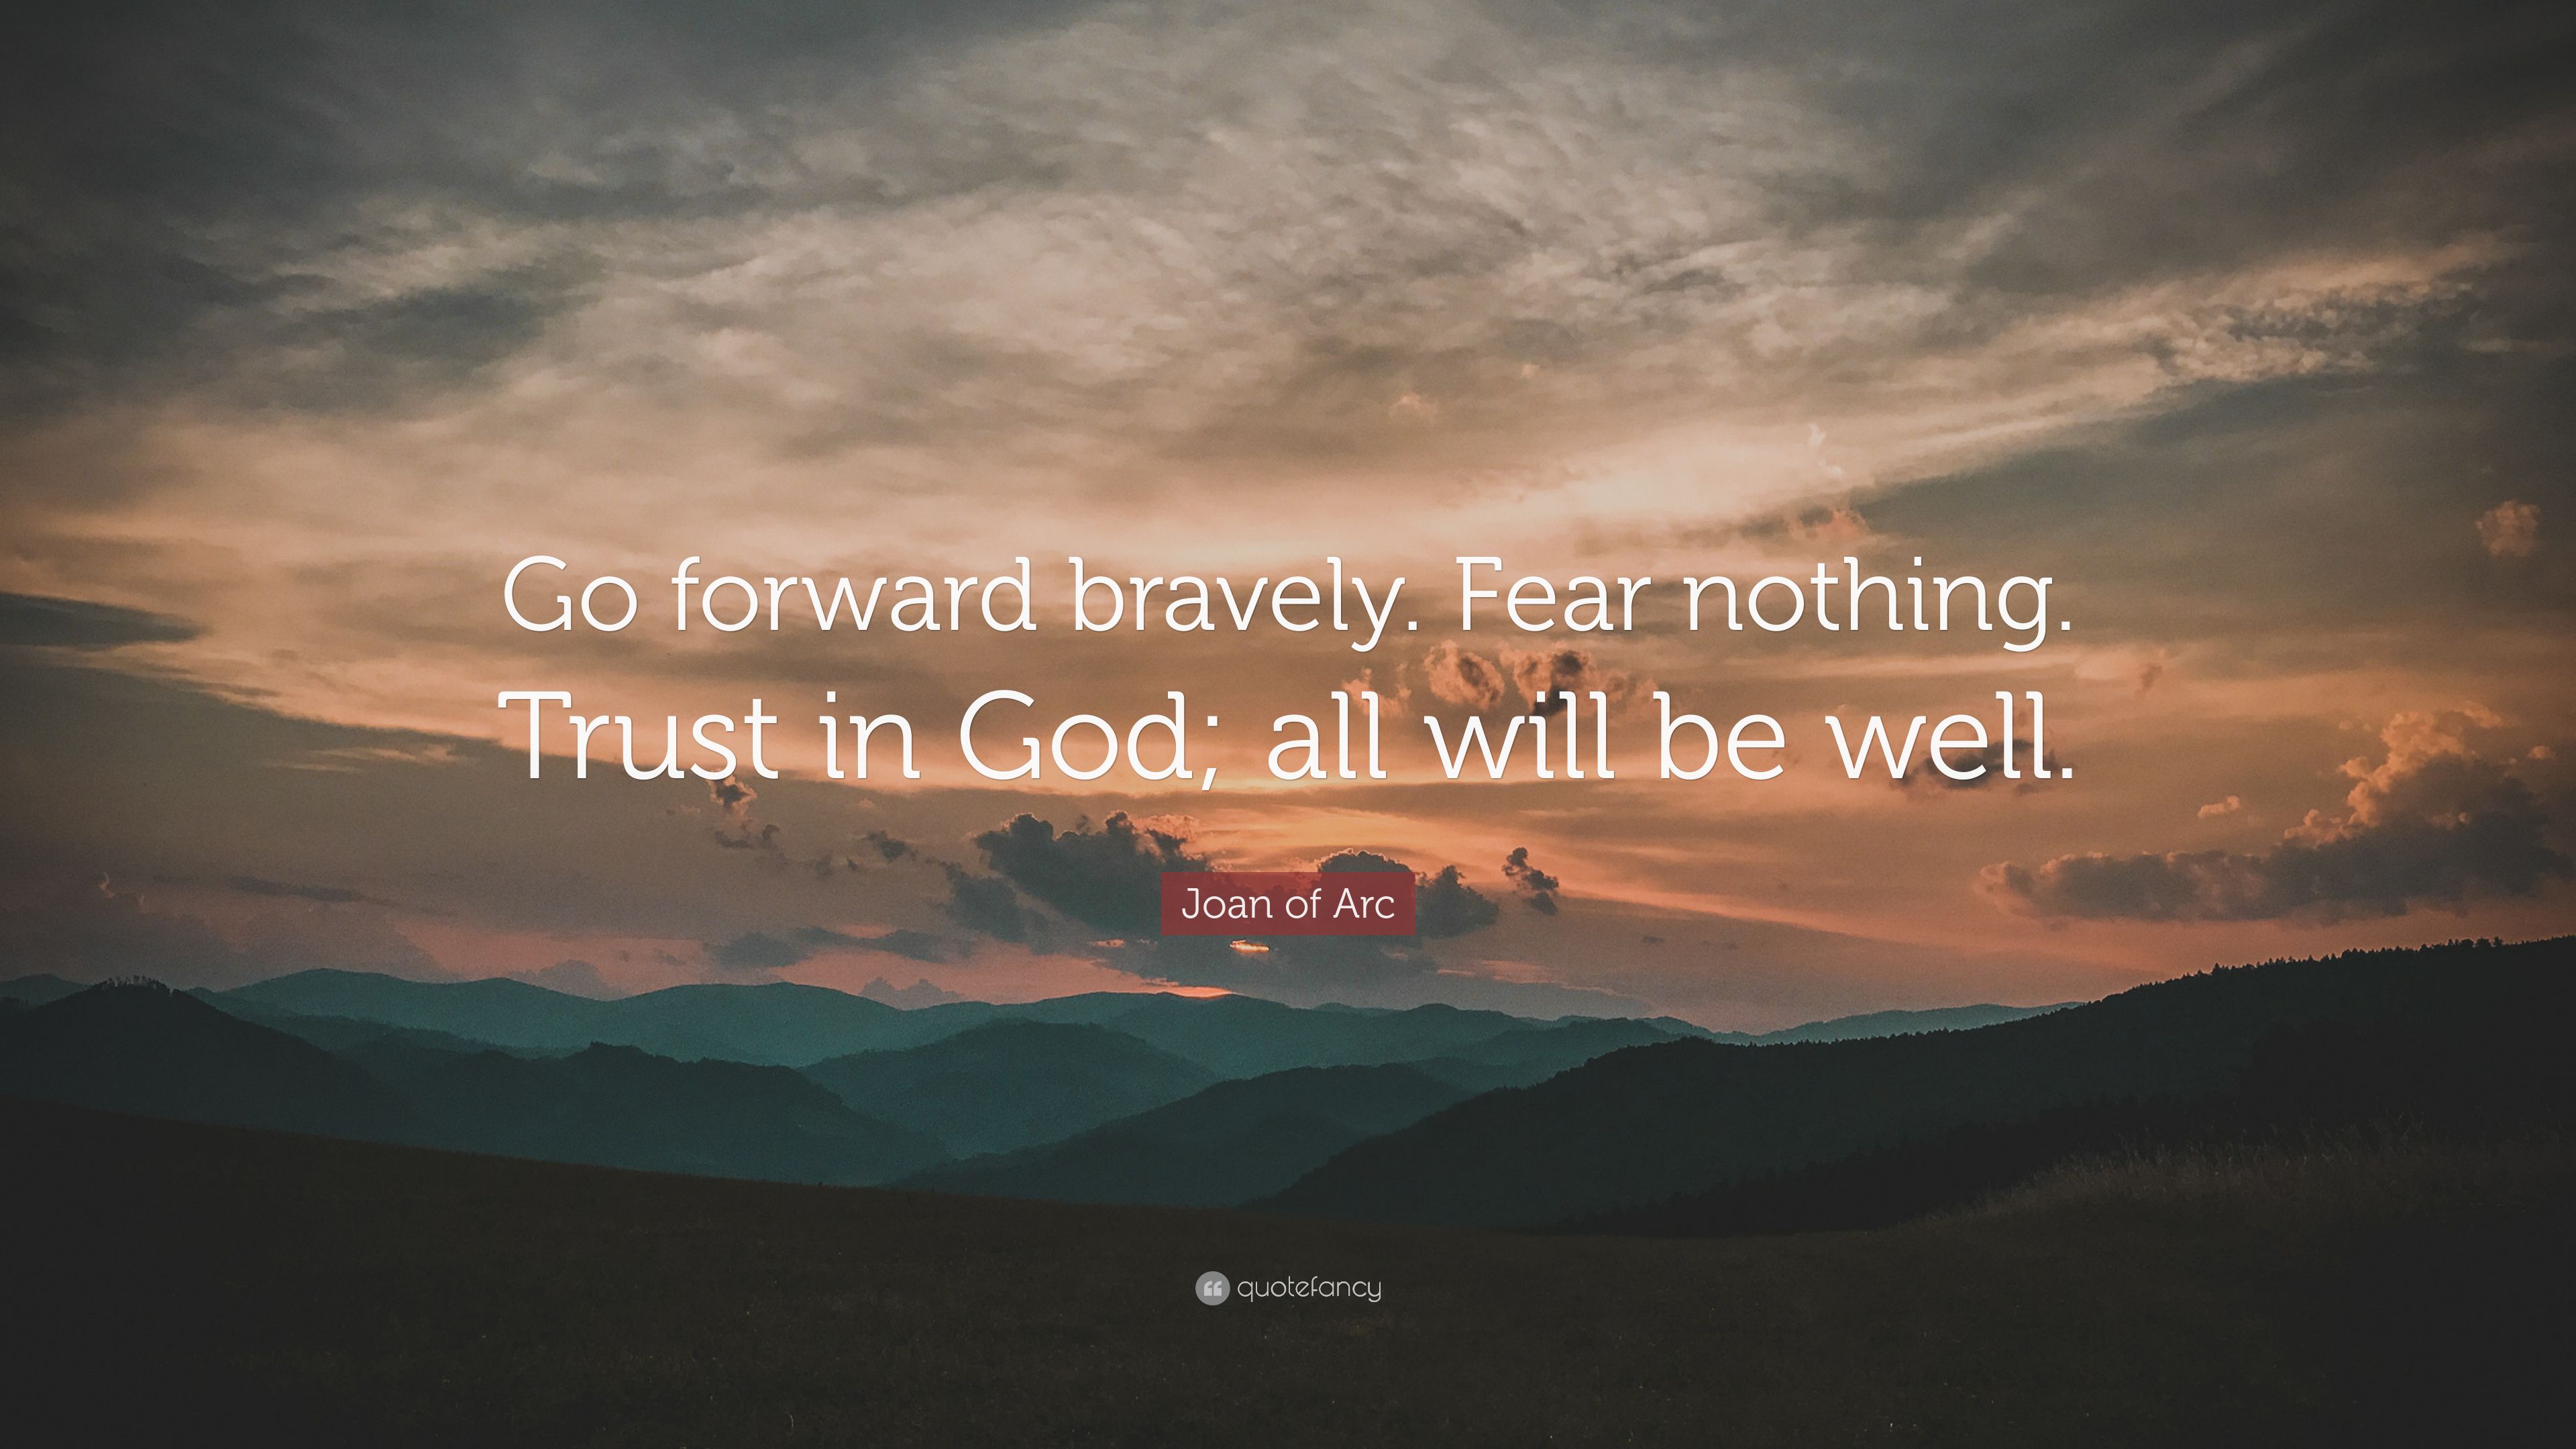 Joan of Arc Quote: “Go forward bravely. Fear nothing. Trust in God; all will be well.” (7 wallpaper)